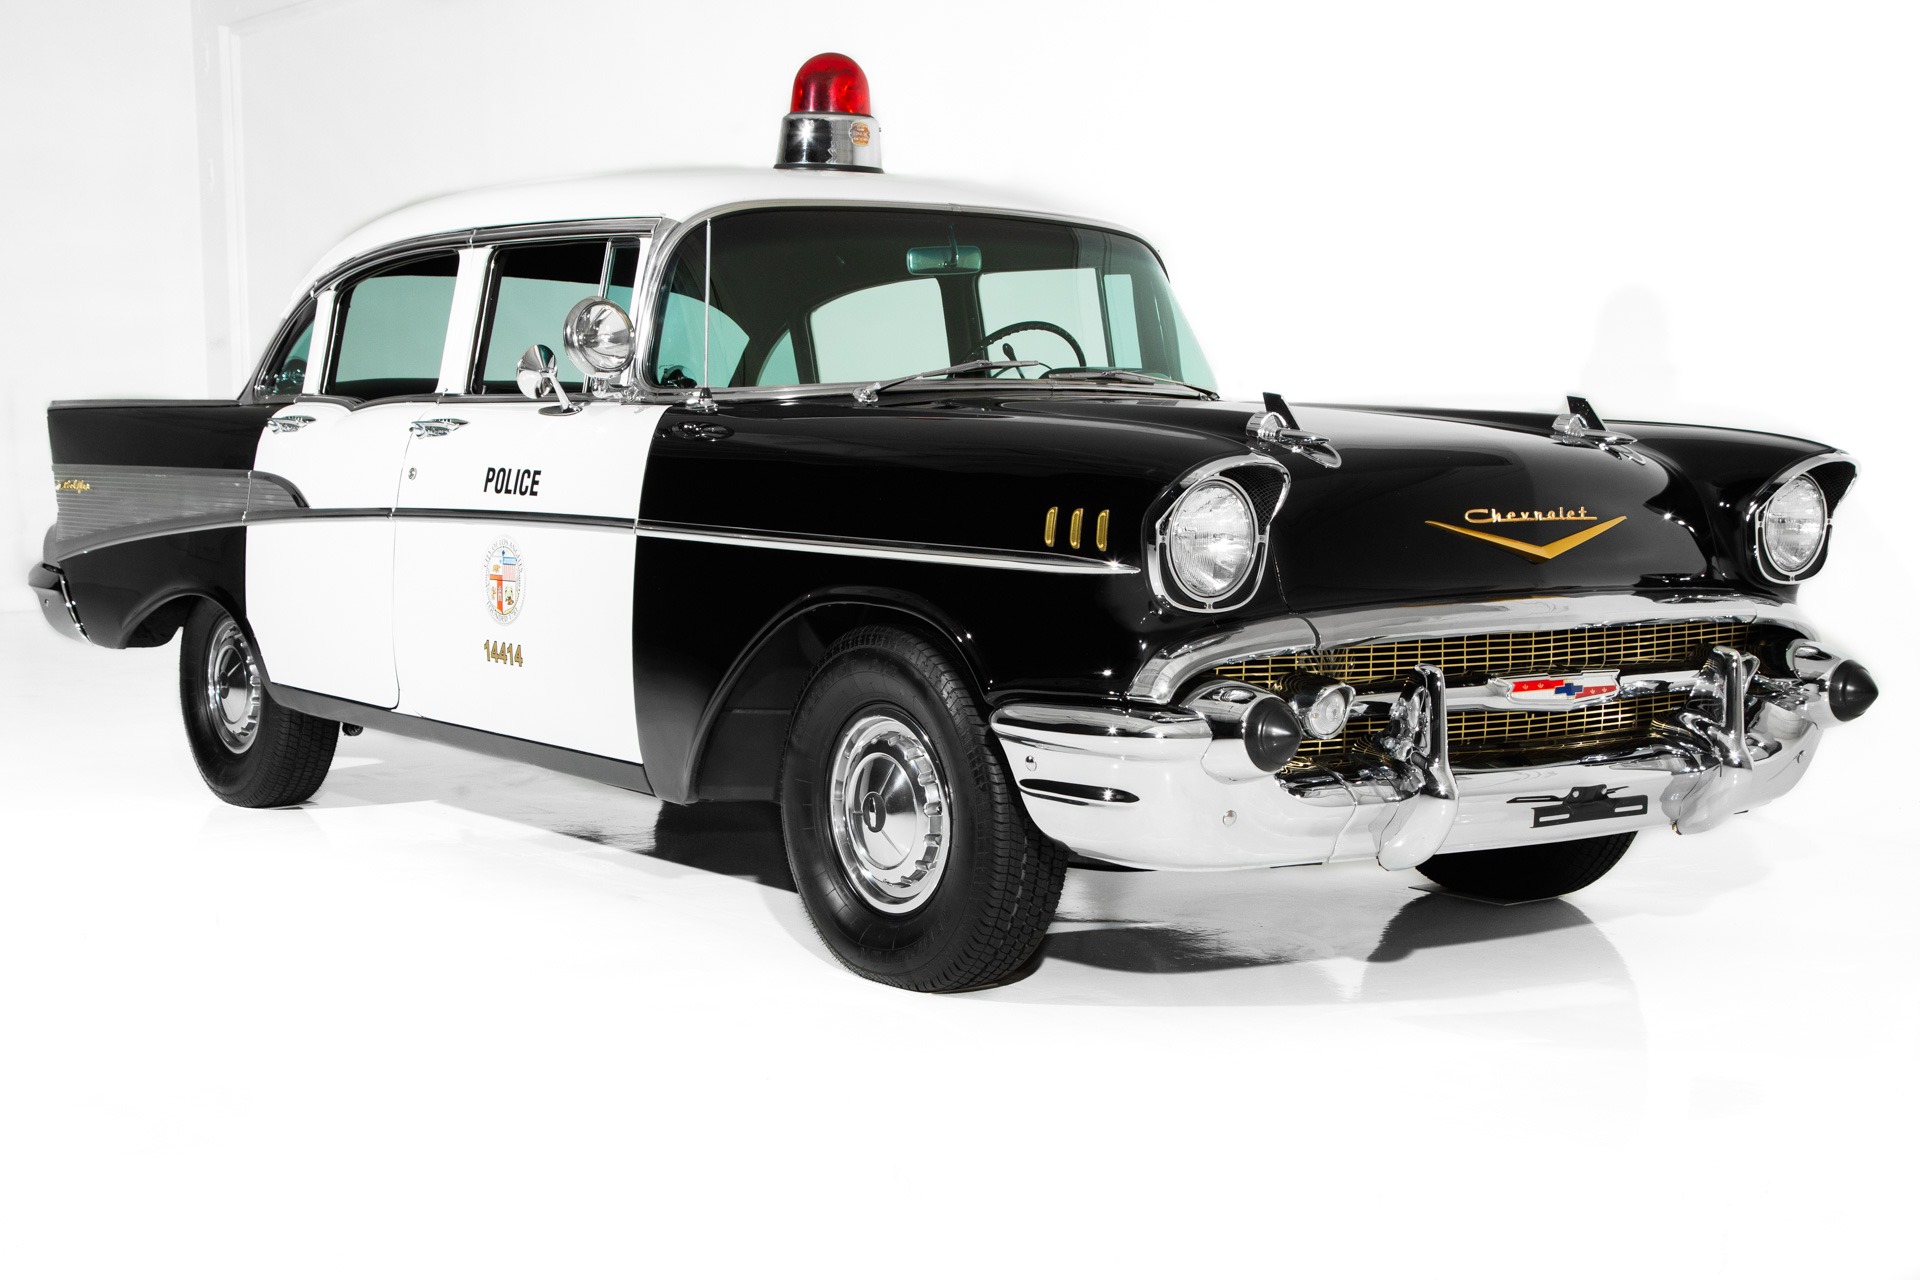 For Sale Used 1957 Chevrolet Bel Air Police Car V8 New Chrome | American Dream Machines Des Moines IA 50309